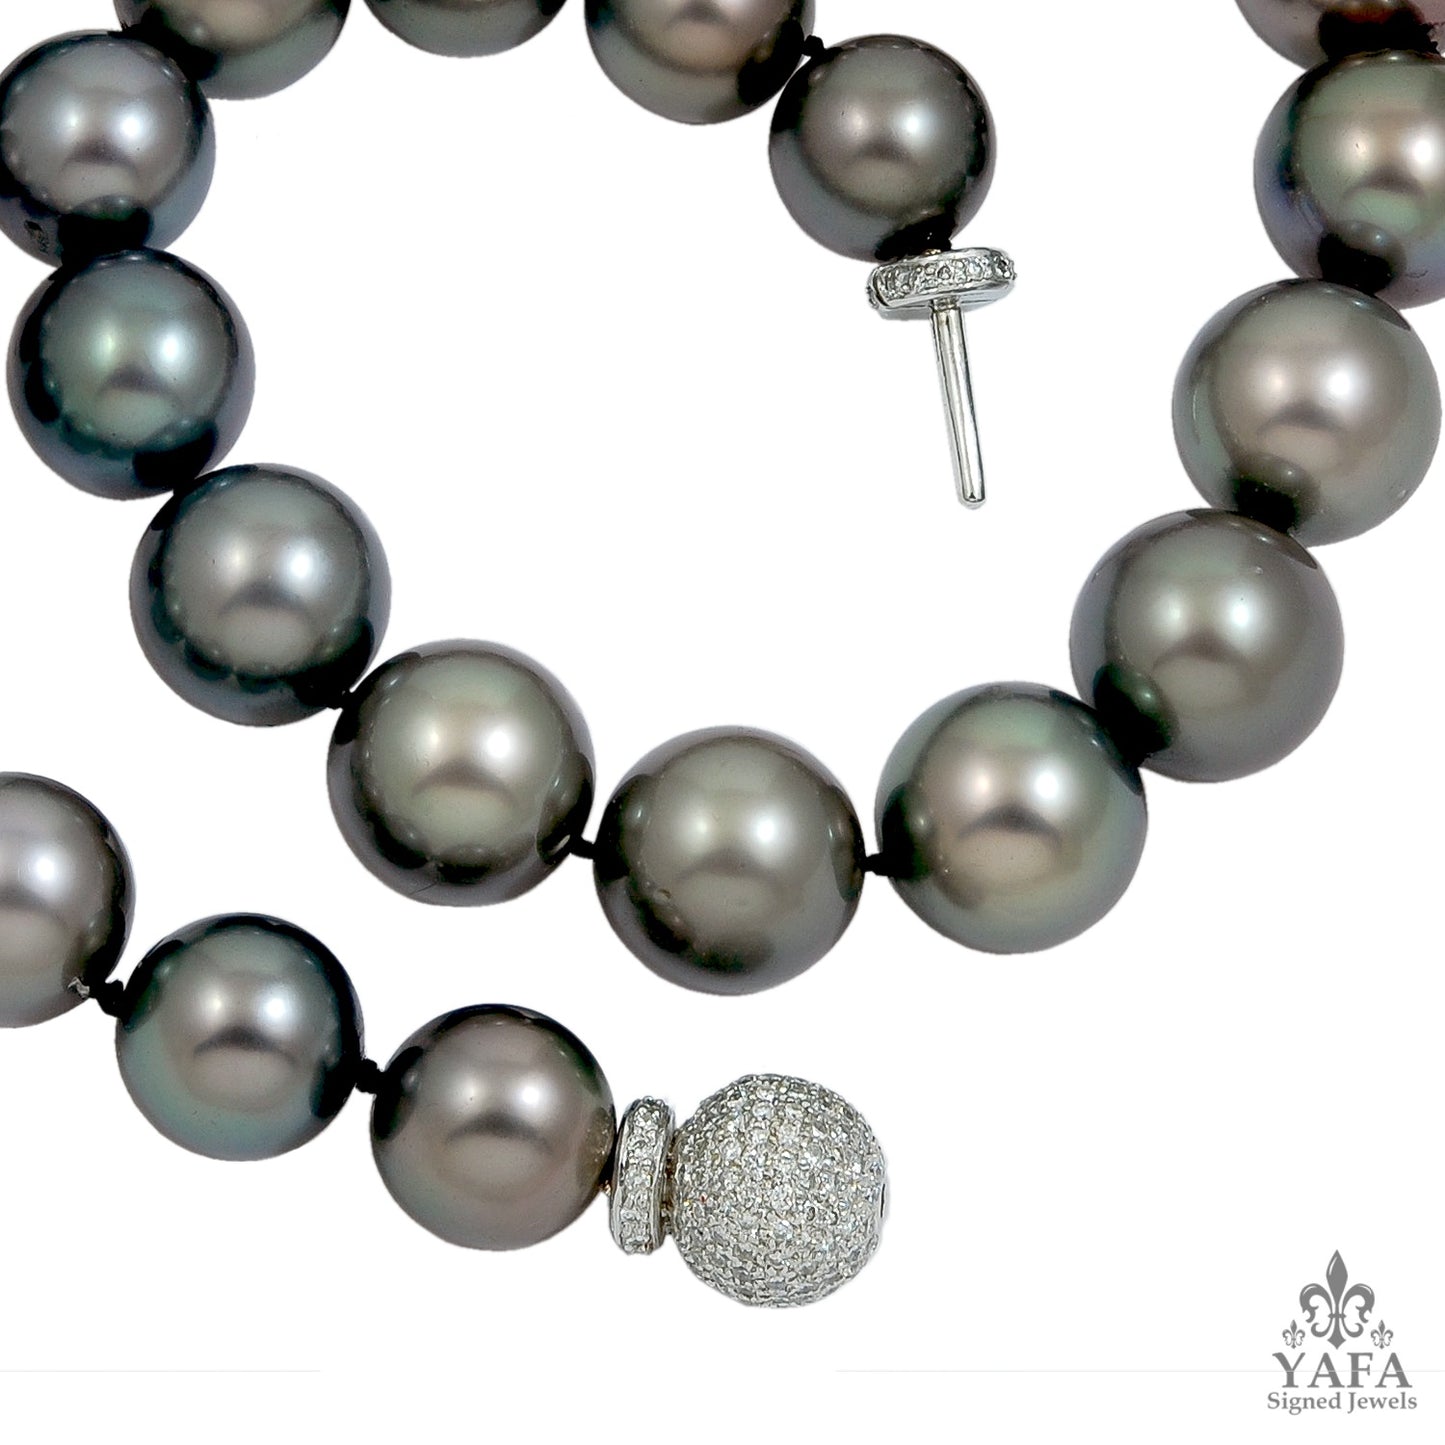 Platinum Diamond and Black South Pearl Clasp Necklace